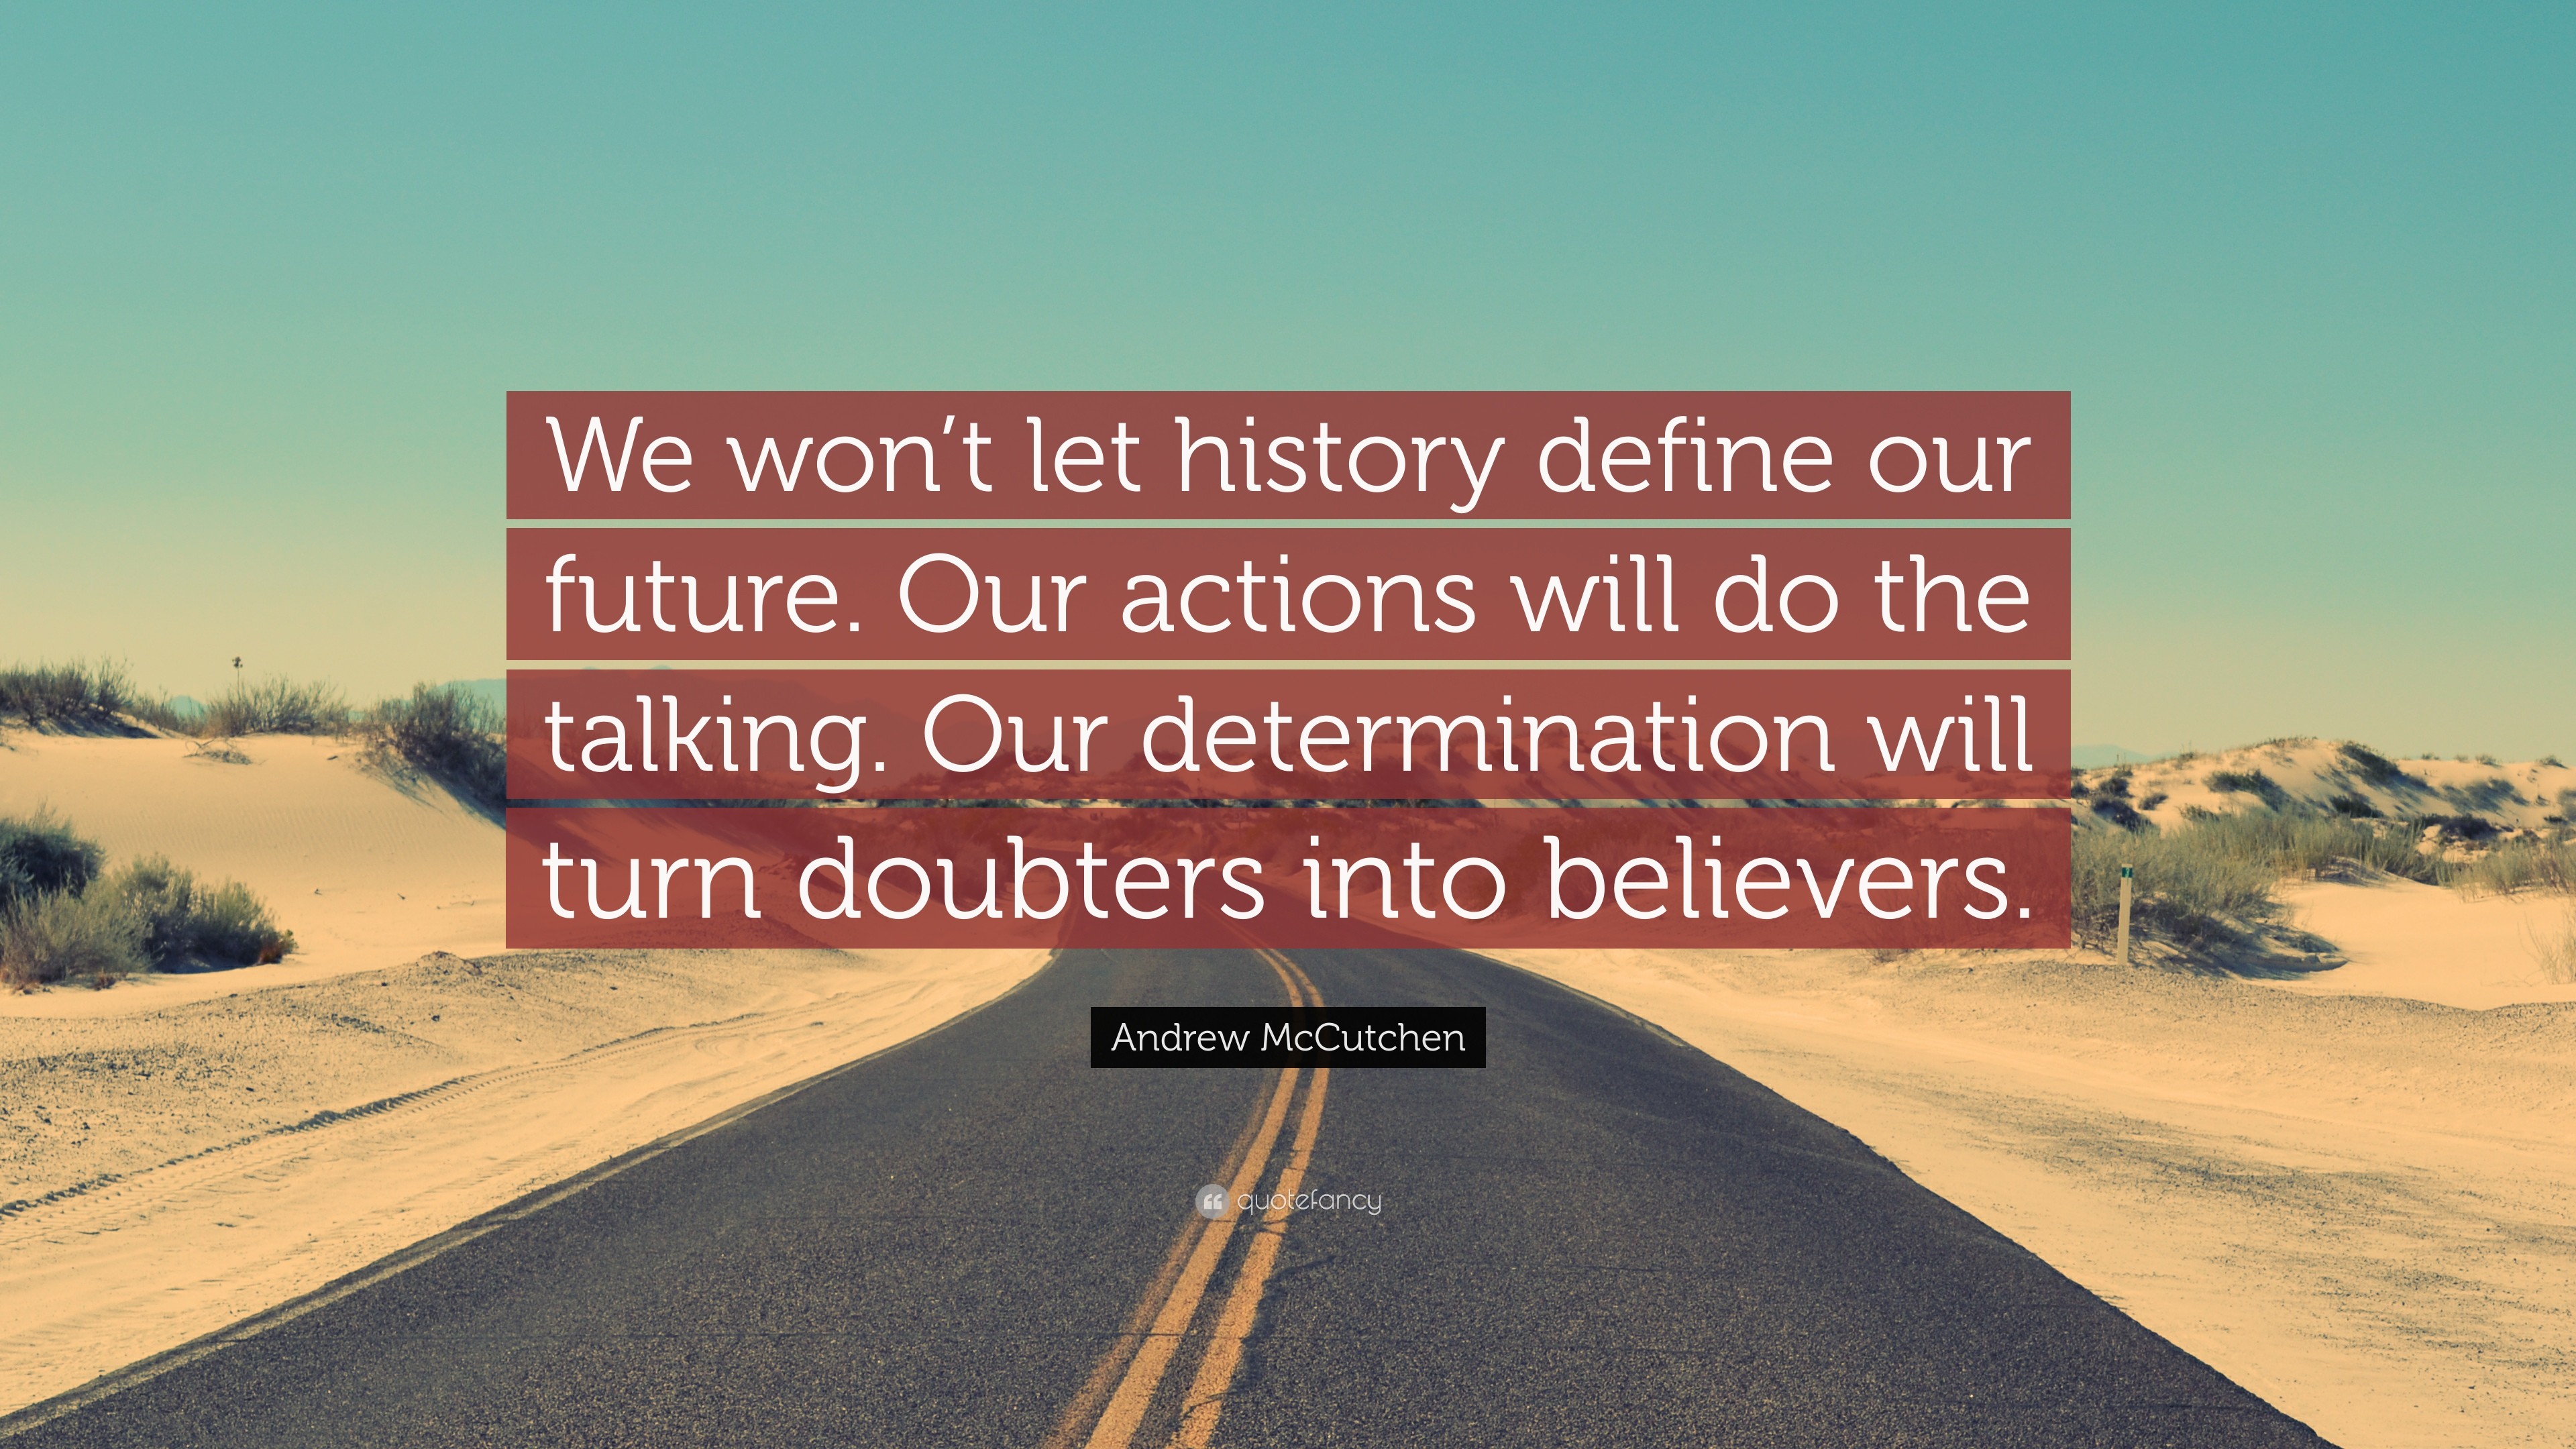 3840x2160 Andrew McCutchen Quote: “We won't let history define our future. Our